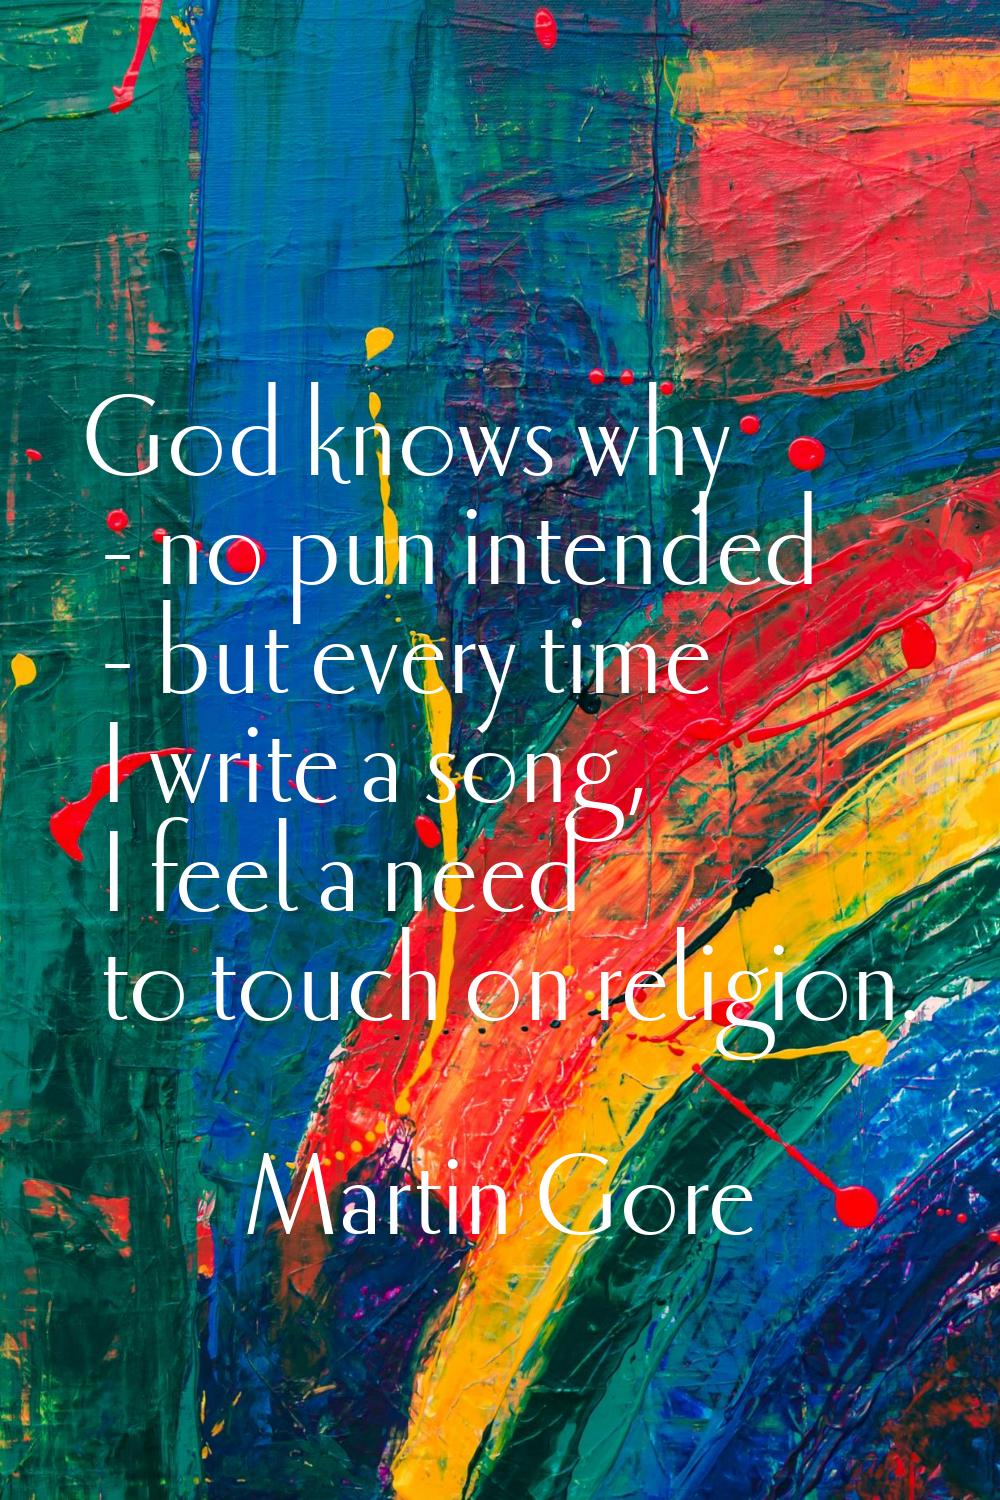 God knows why - no pun intended - but every time I write a song, I feel a need to touch on religion